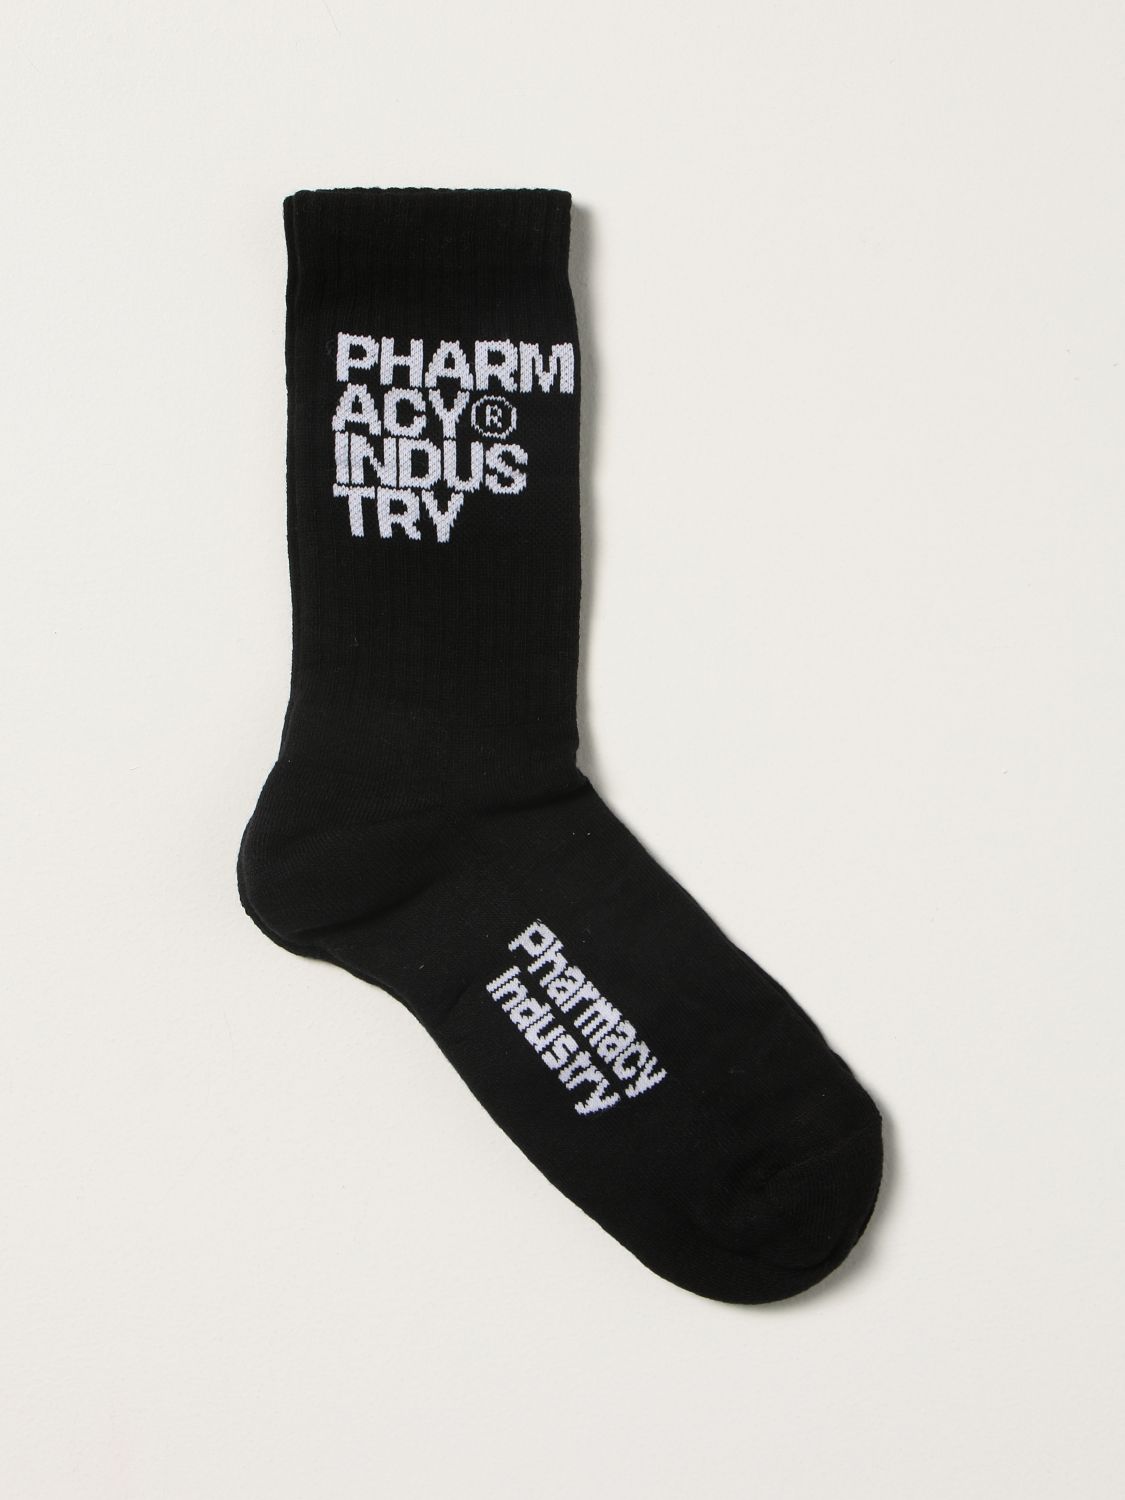 Chaussettes Pharmacy Industry: Chaussettes femme Pharmacy Industry noir 1